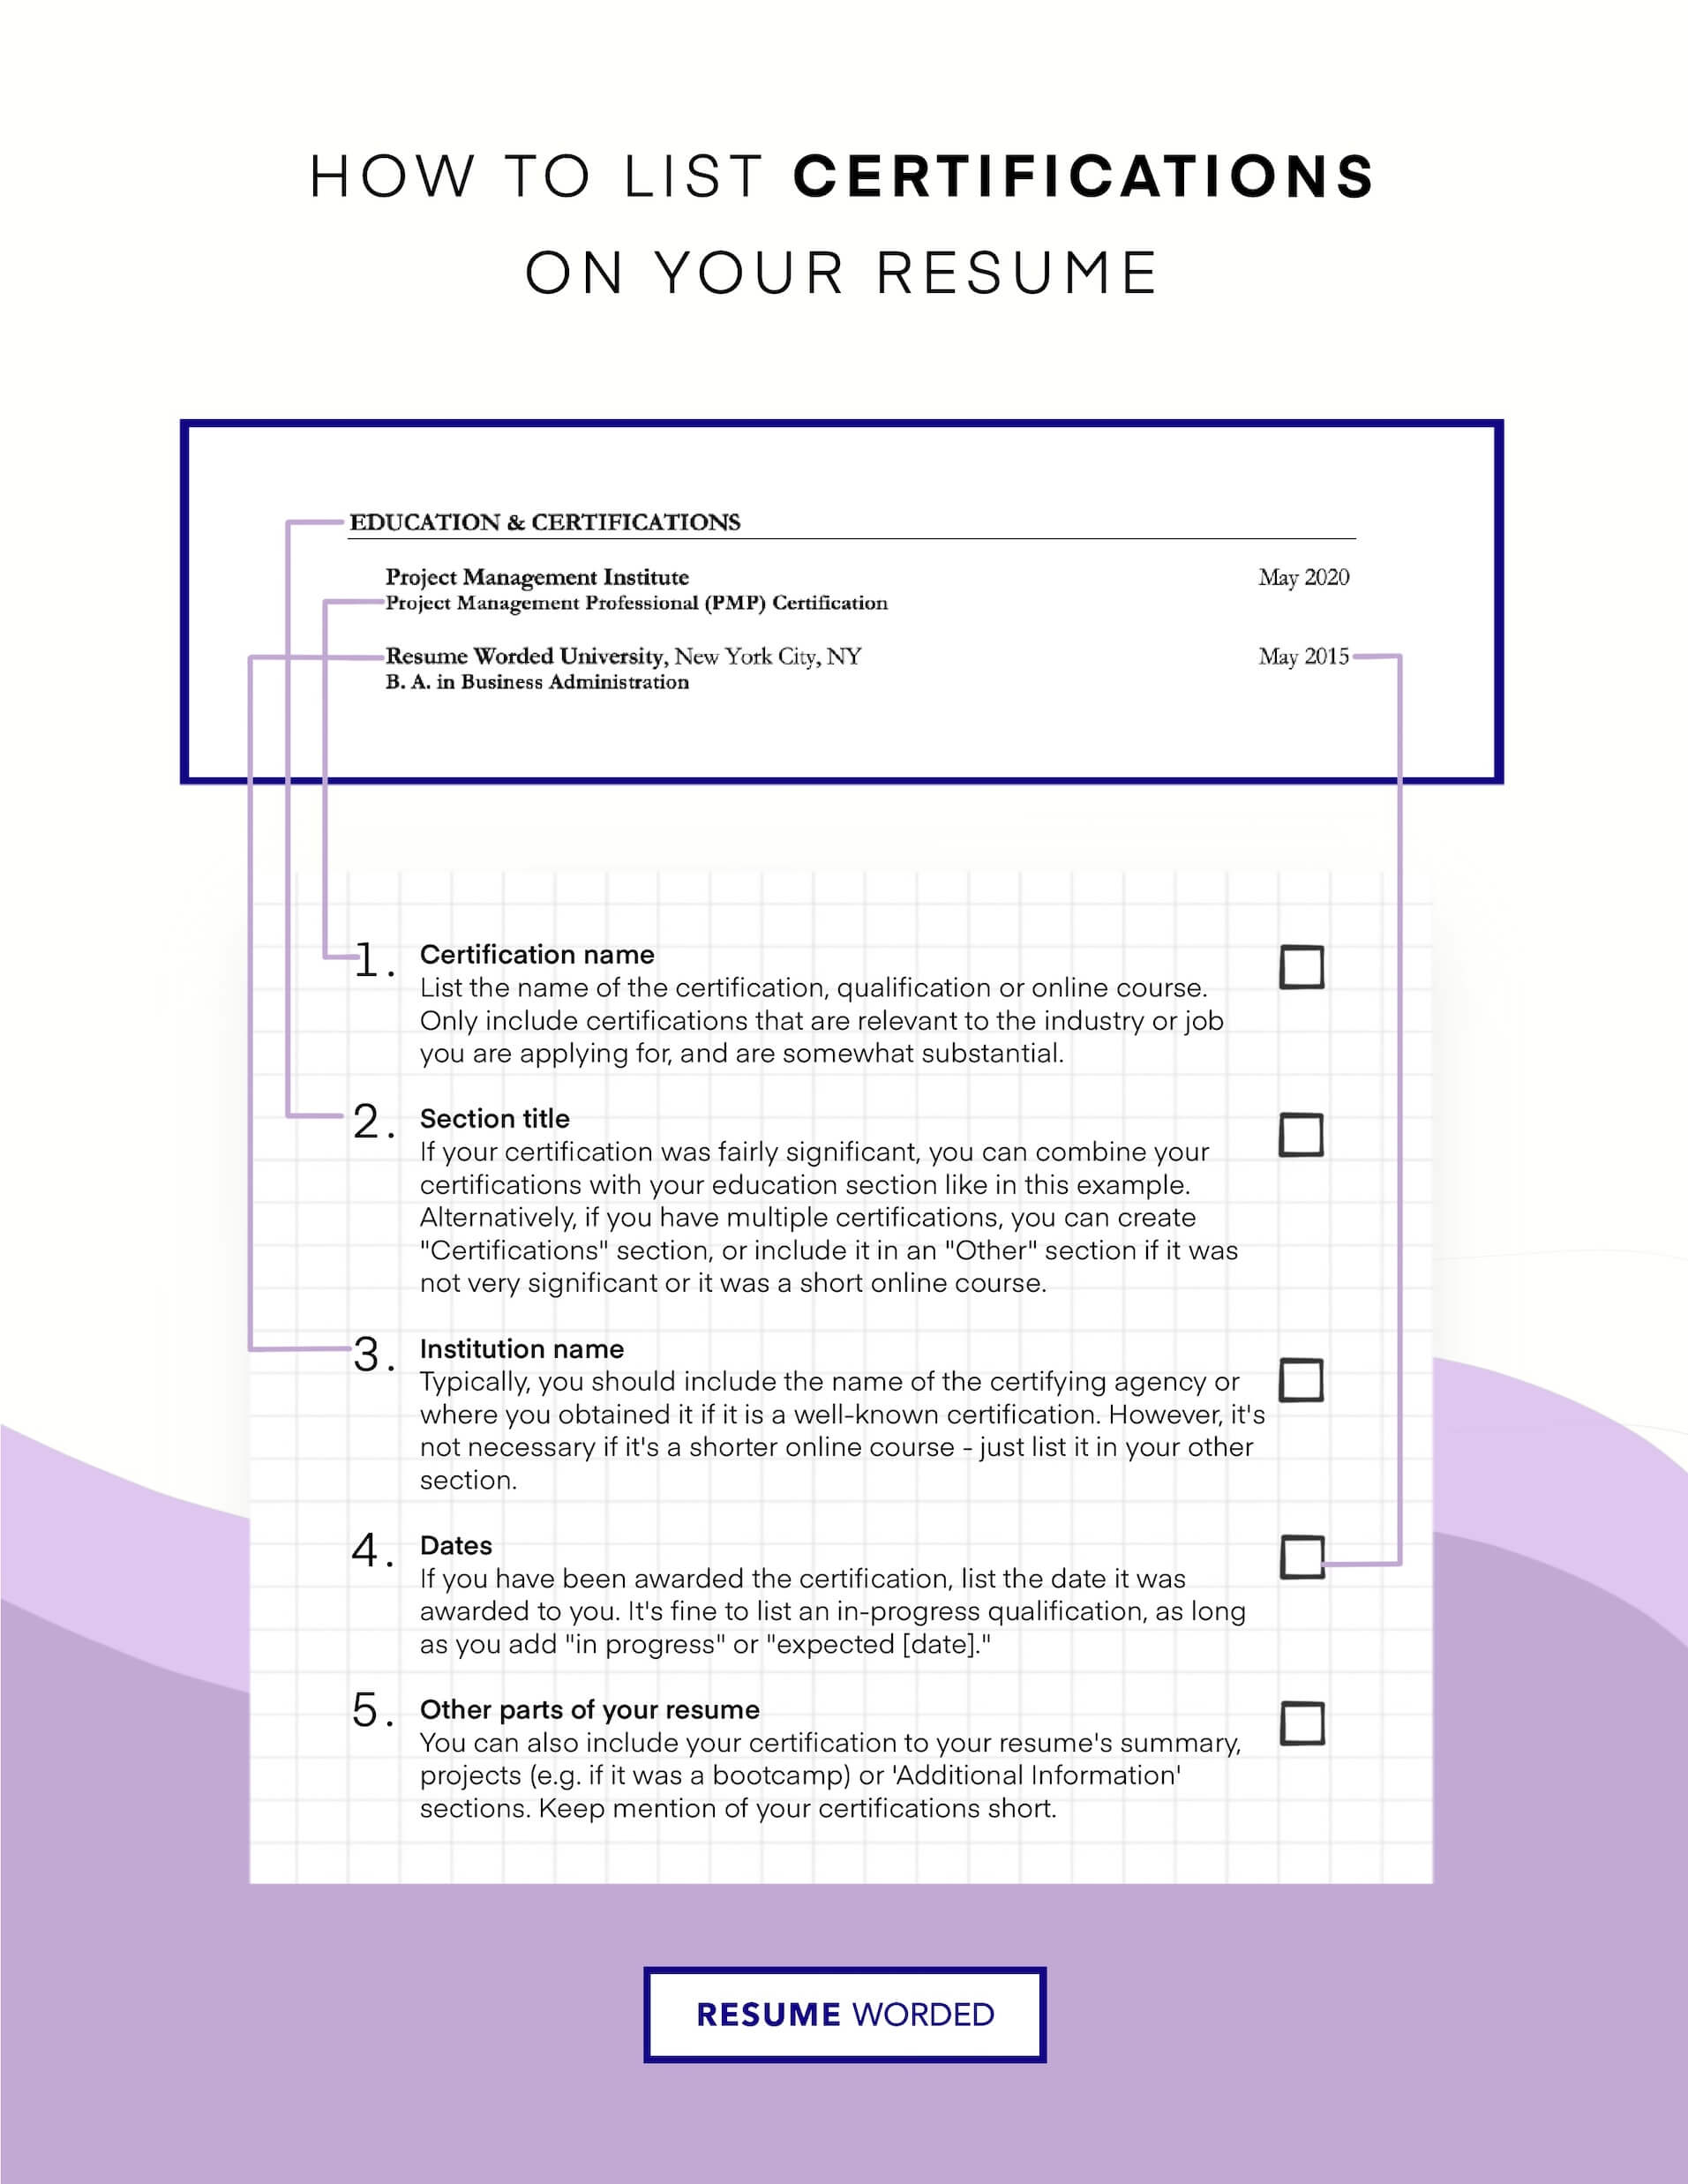 Bolster your resume with a CRS certification - Experienced Real Estate Agent Resume